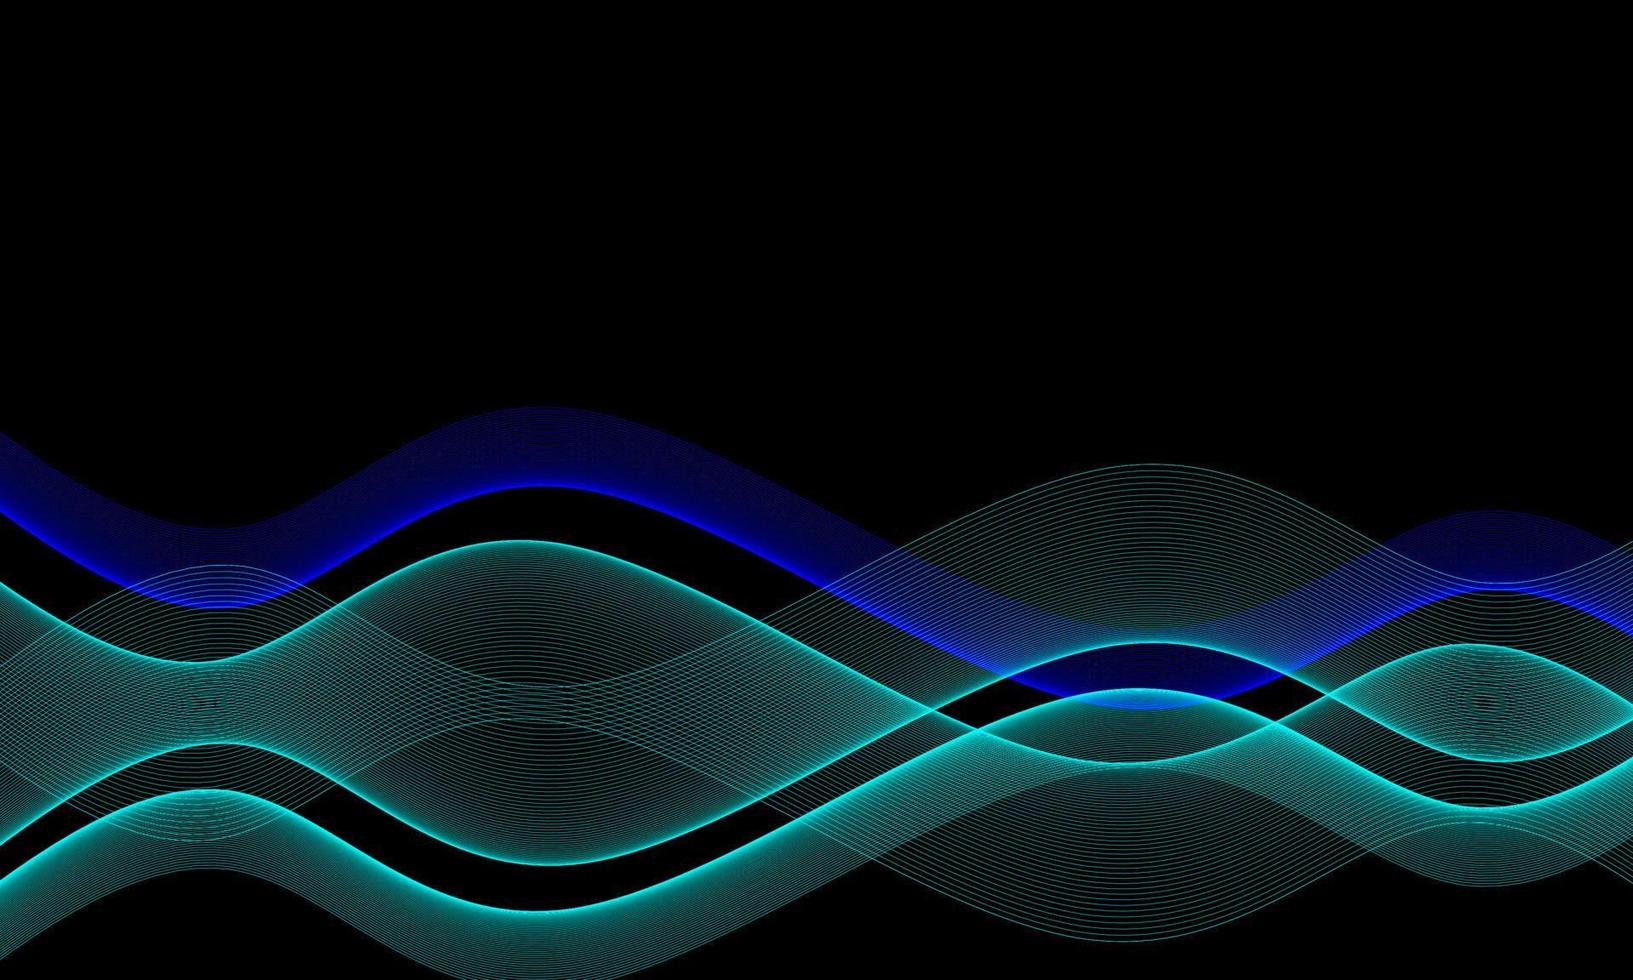 Abstract wave lines dynamic flowing blue and green light isolated on black background. Vector illustration design concept of music, party, technology, modern.